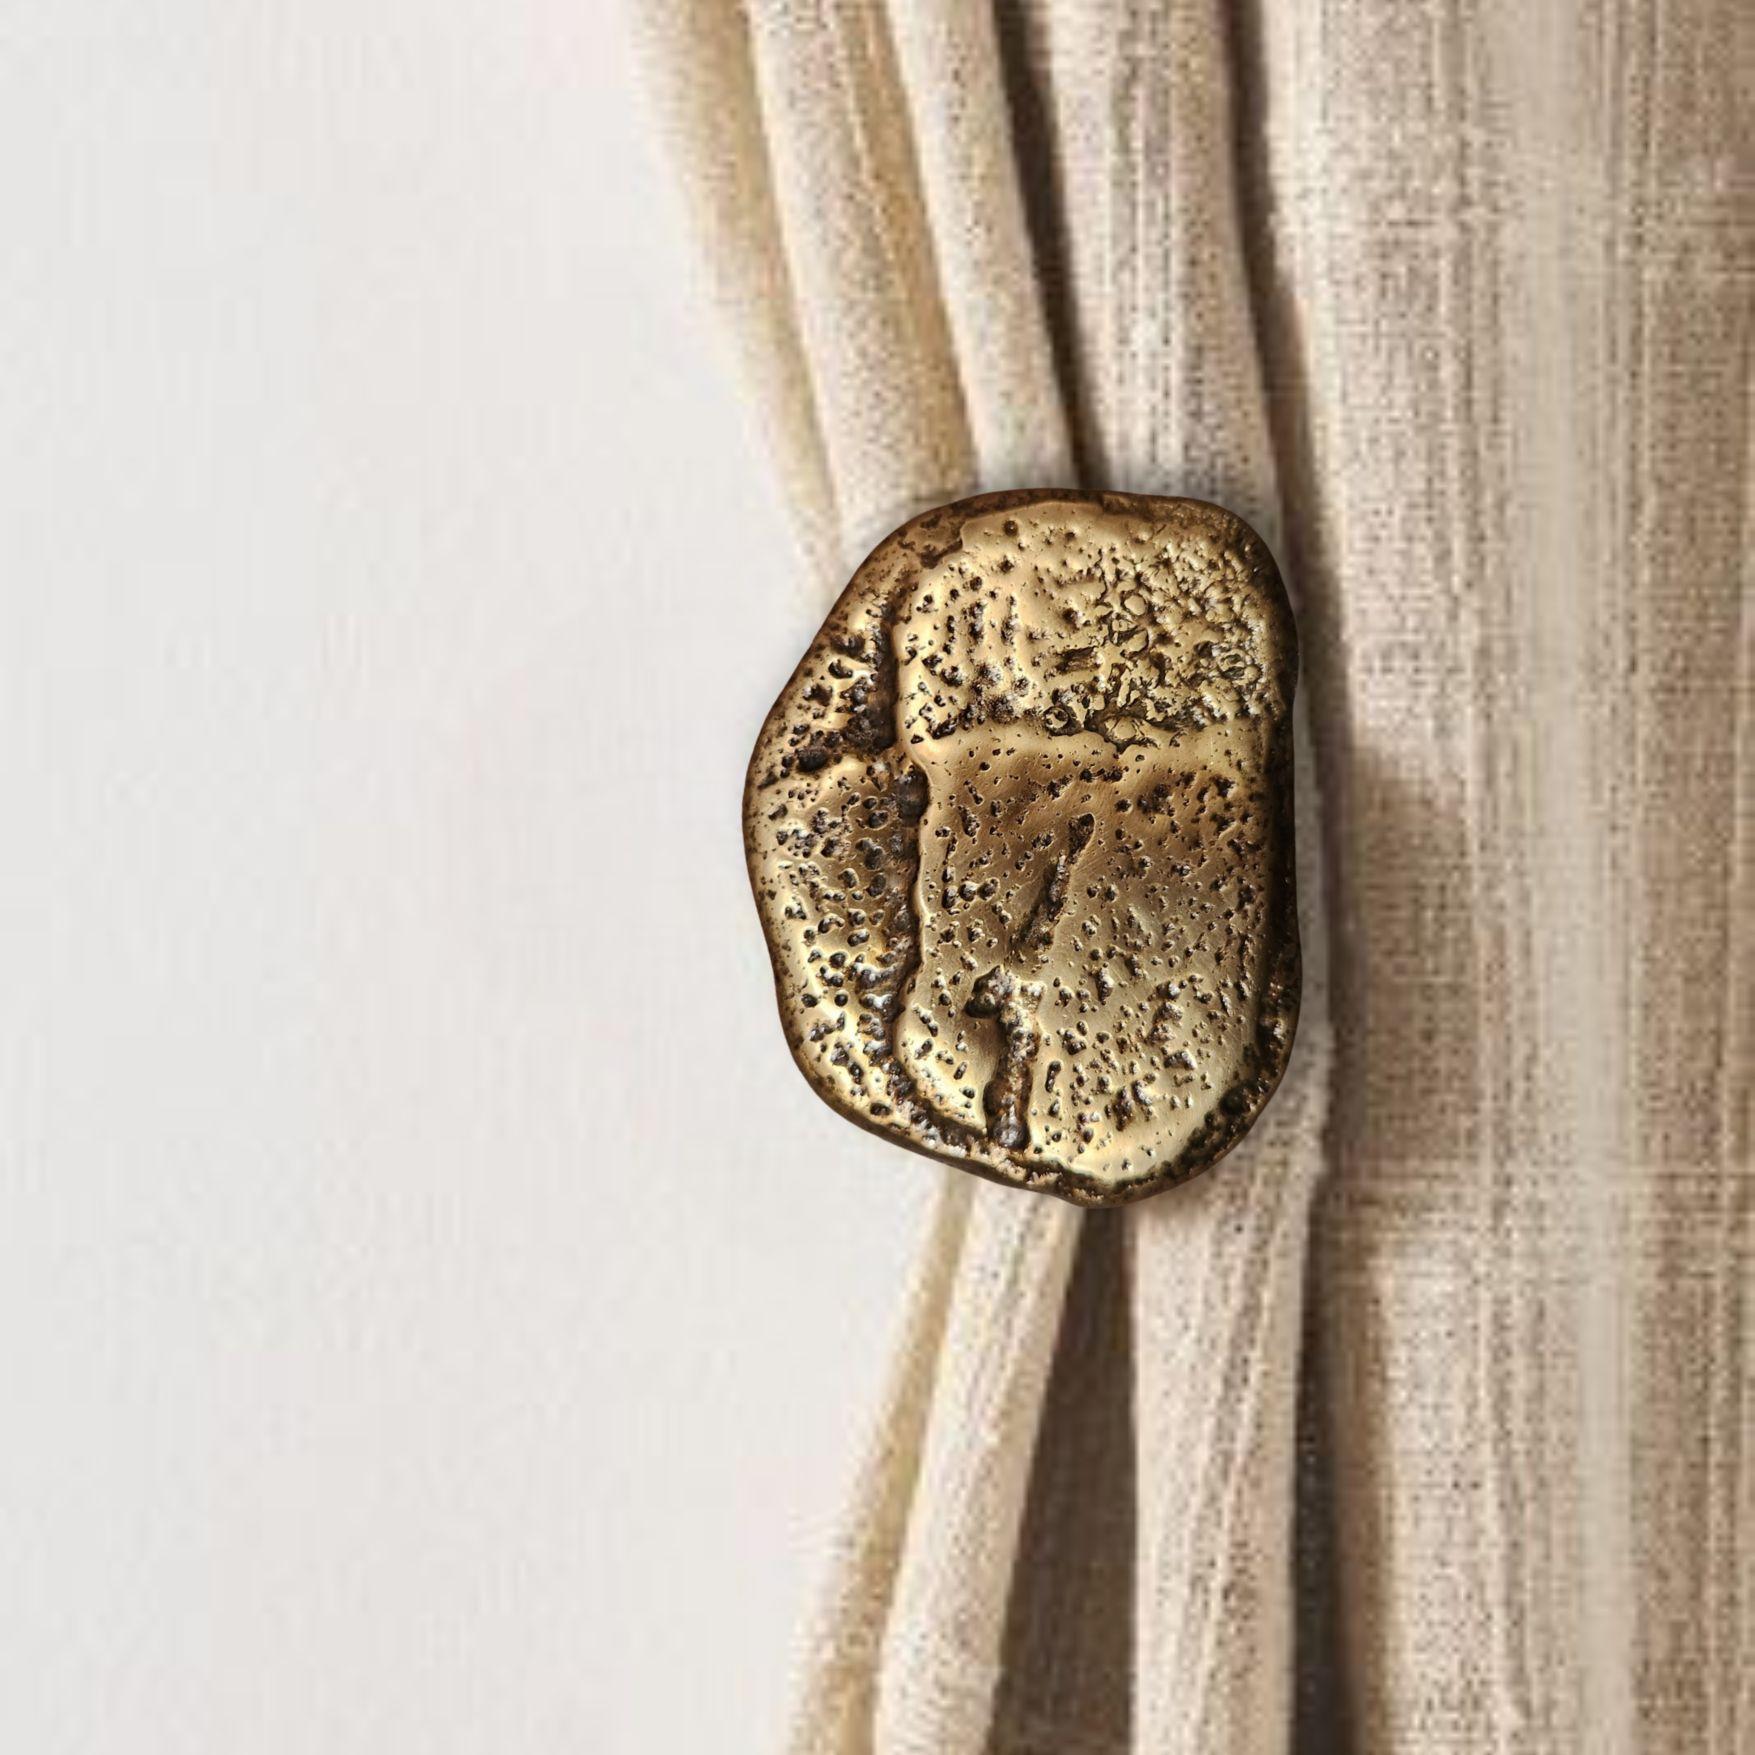 The meeting point between functionality and mineral essence. 
Each curtain hook tells a story, evoking rituals or connections with nature.
